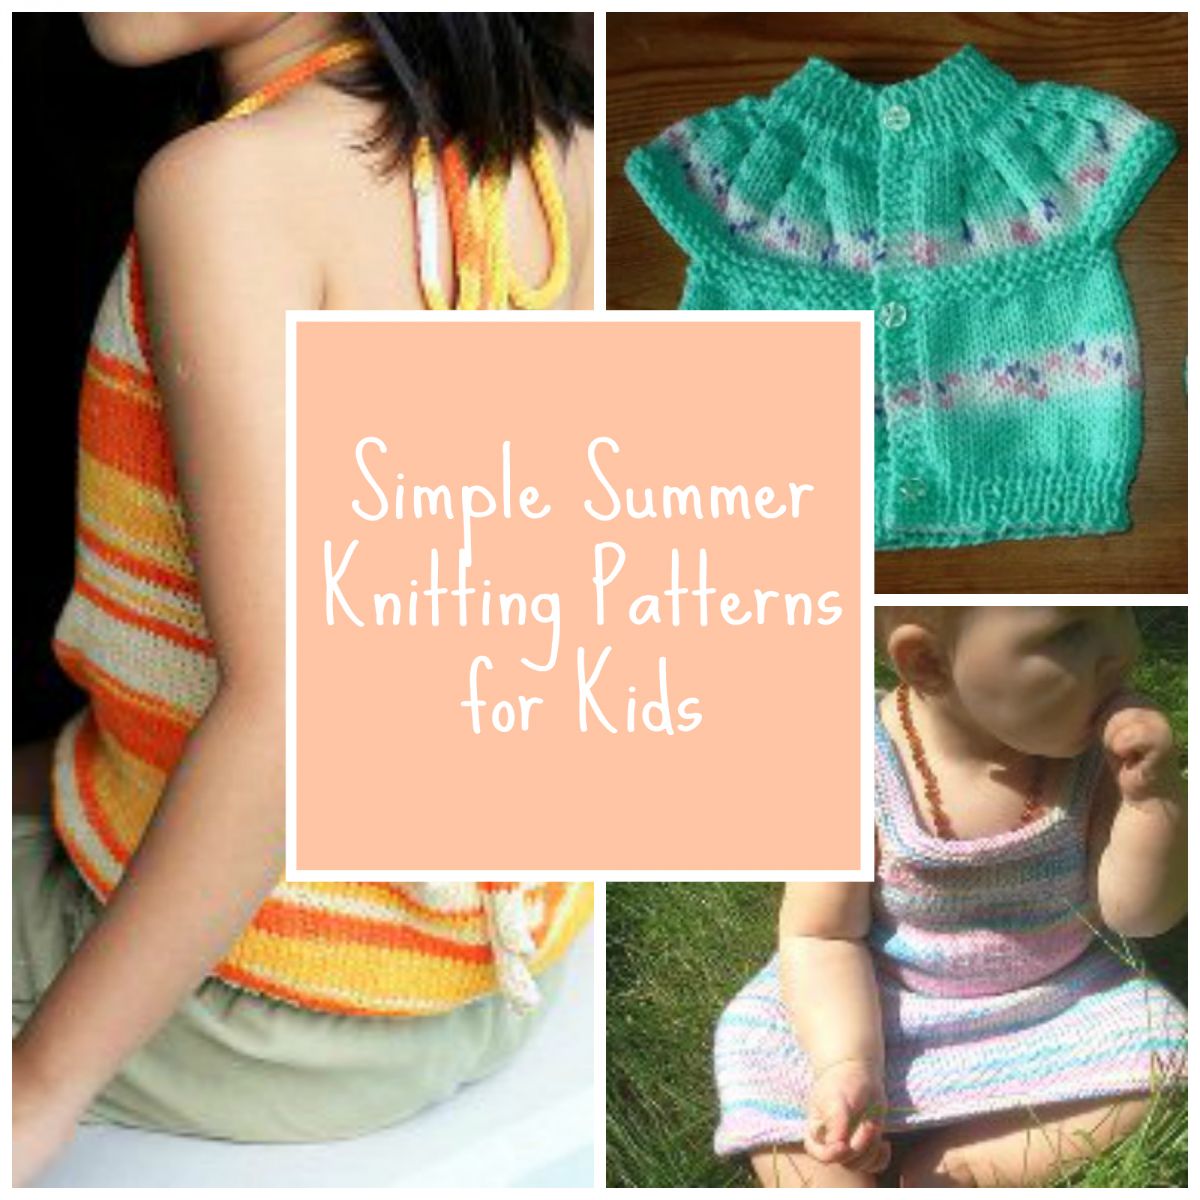 16 Simple Summer Knitting Patterns for Kids